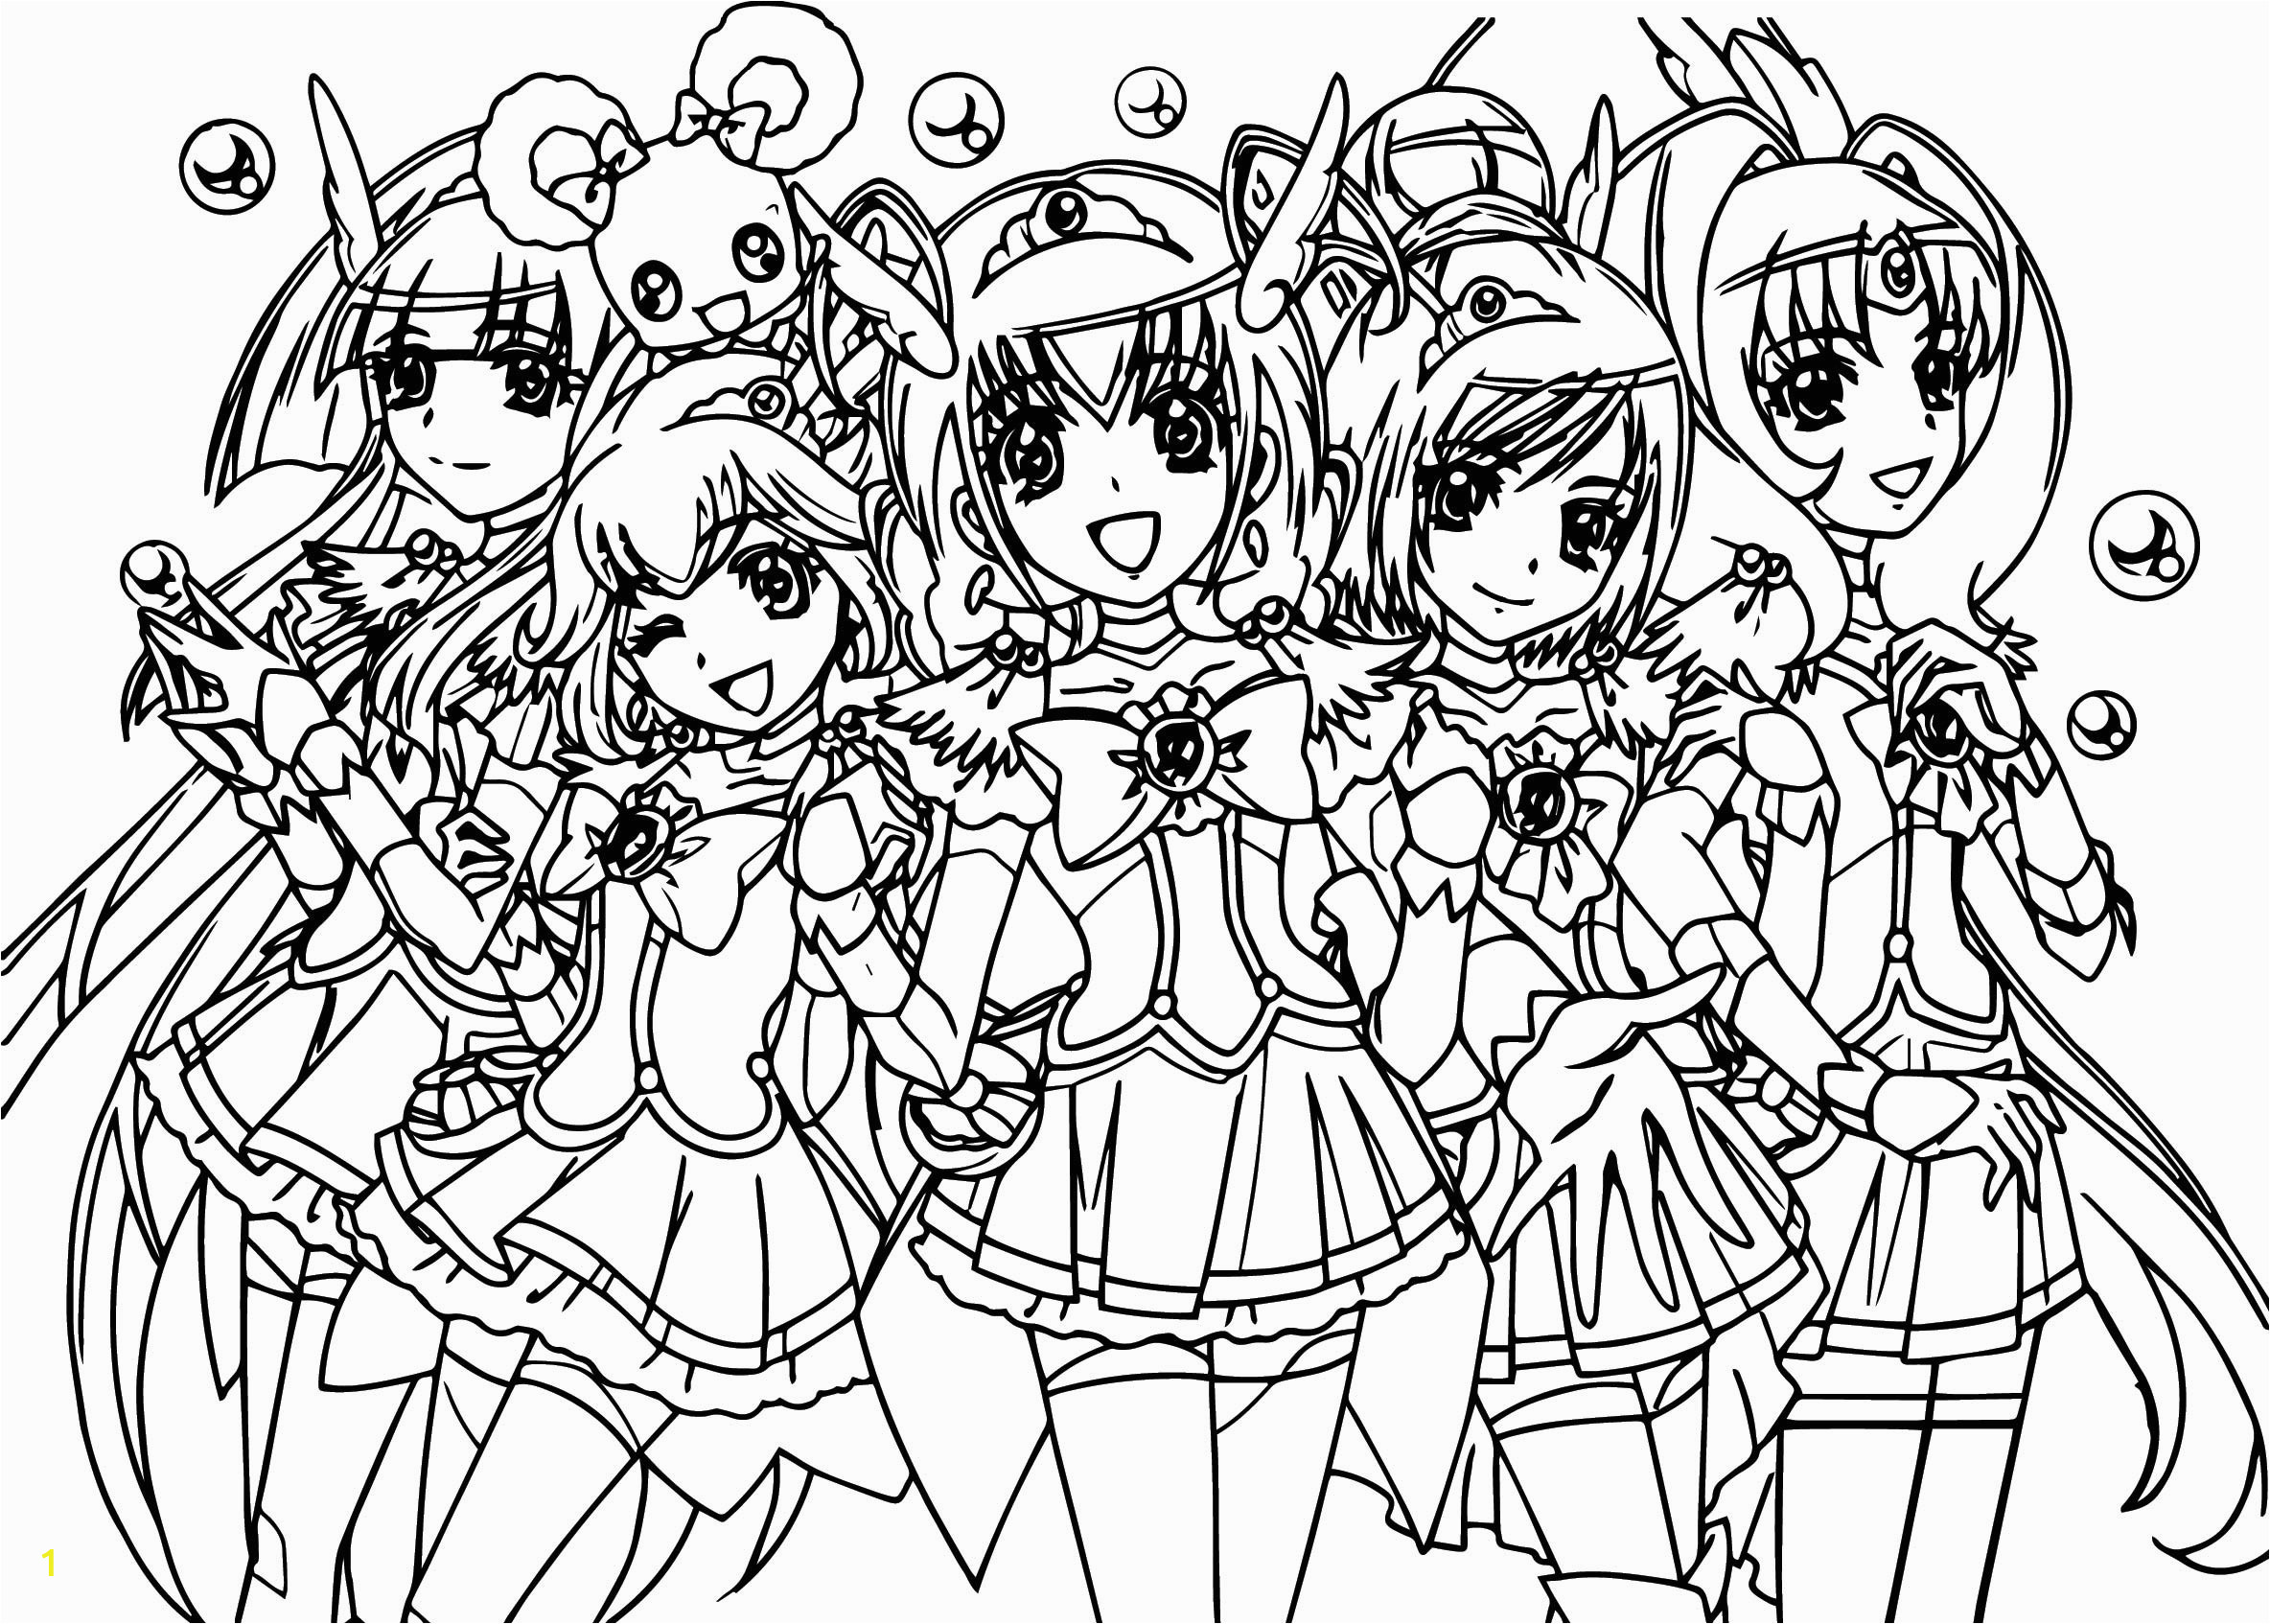 Glitter force Doki Doki Coloring Pages Cartoons G force Coloring Pages Printable Kinderpages